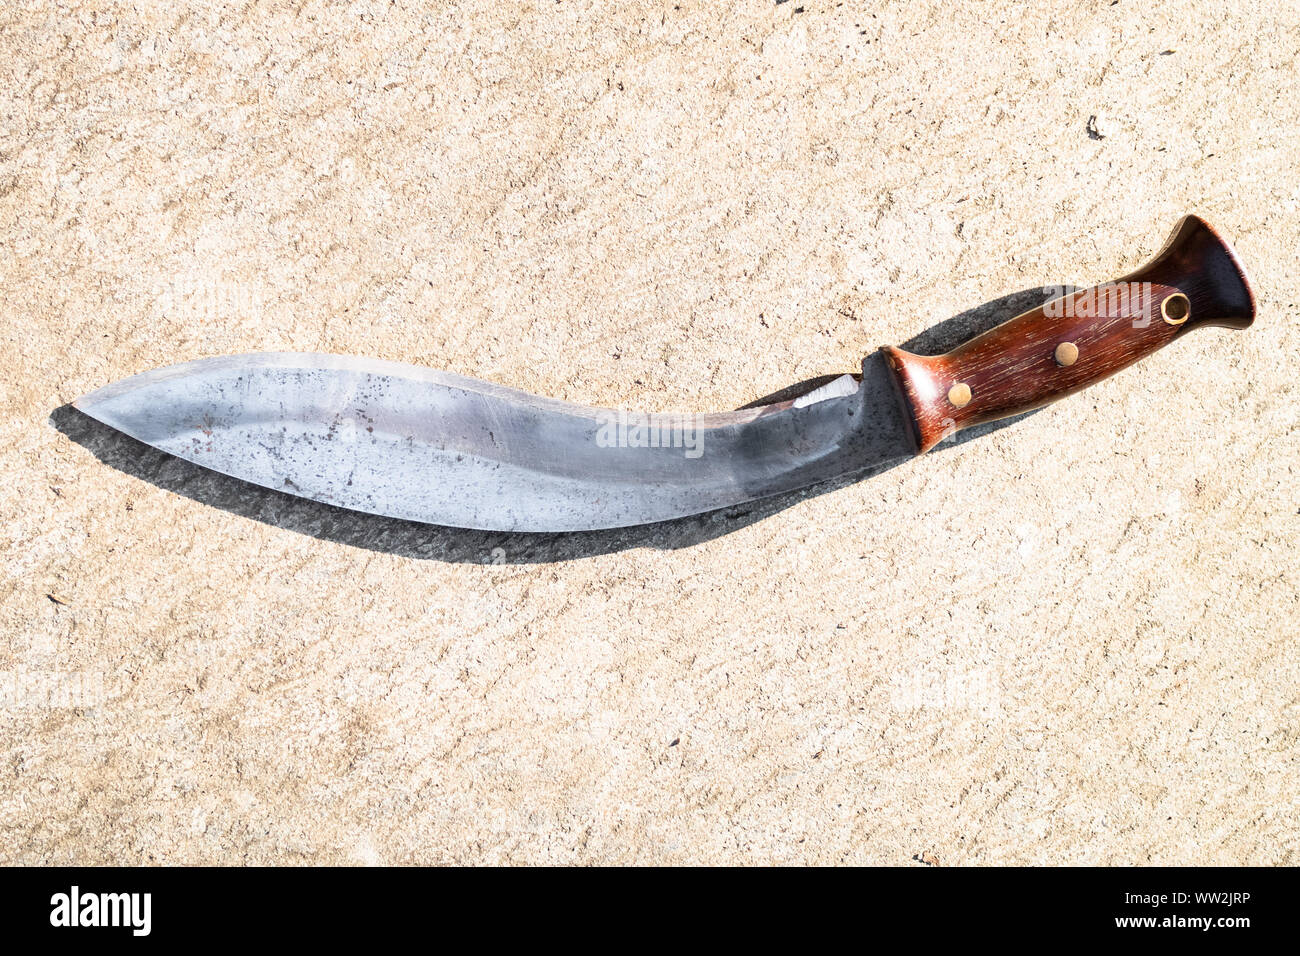 top view of traditional Nepali knife Kukri on outdoor concrete board Stock Photo